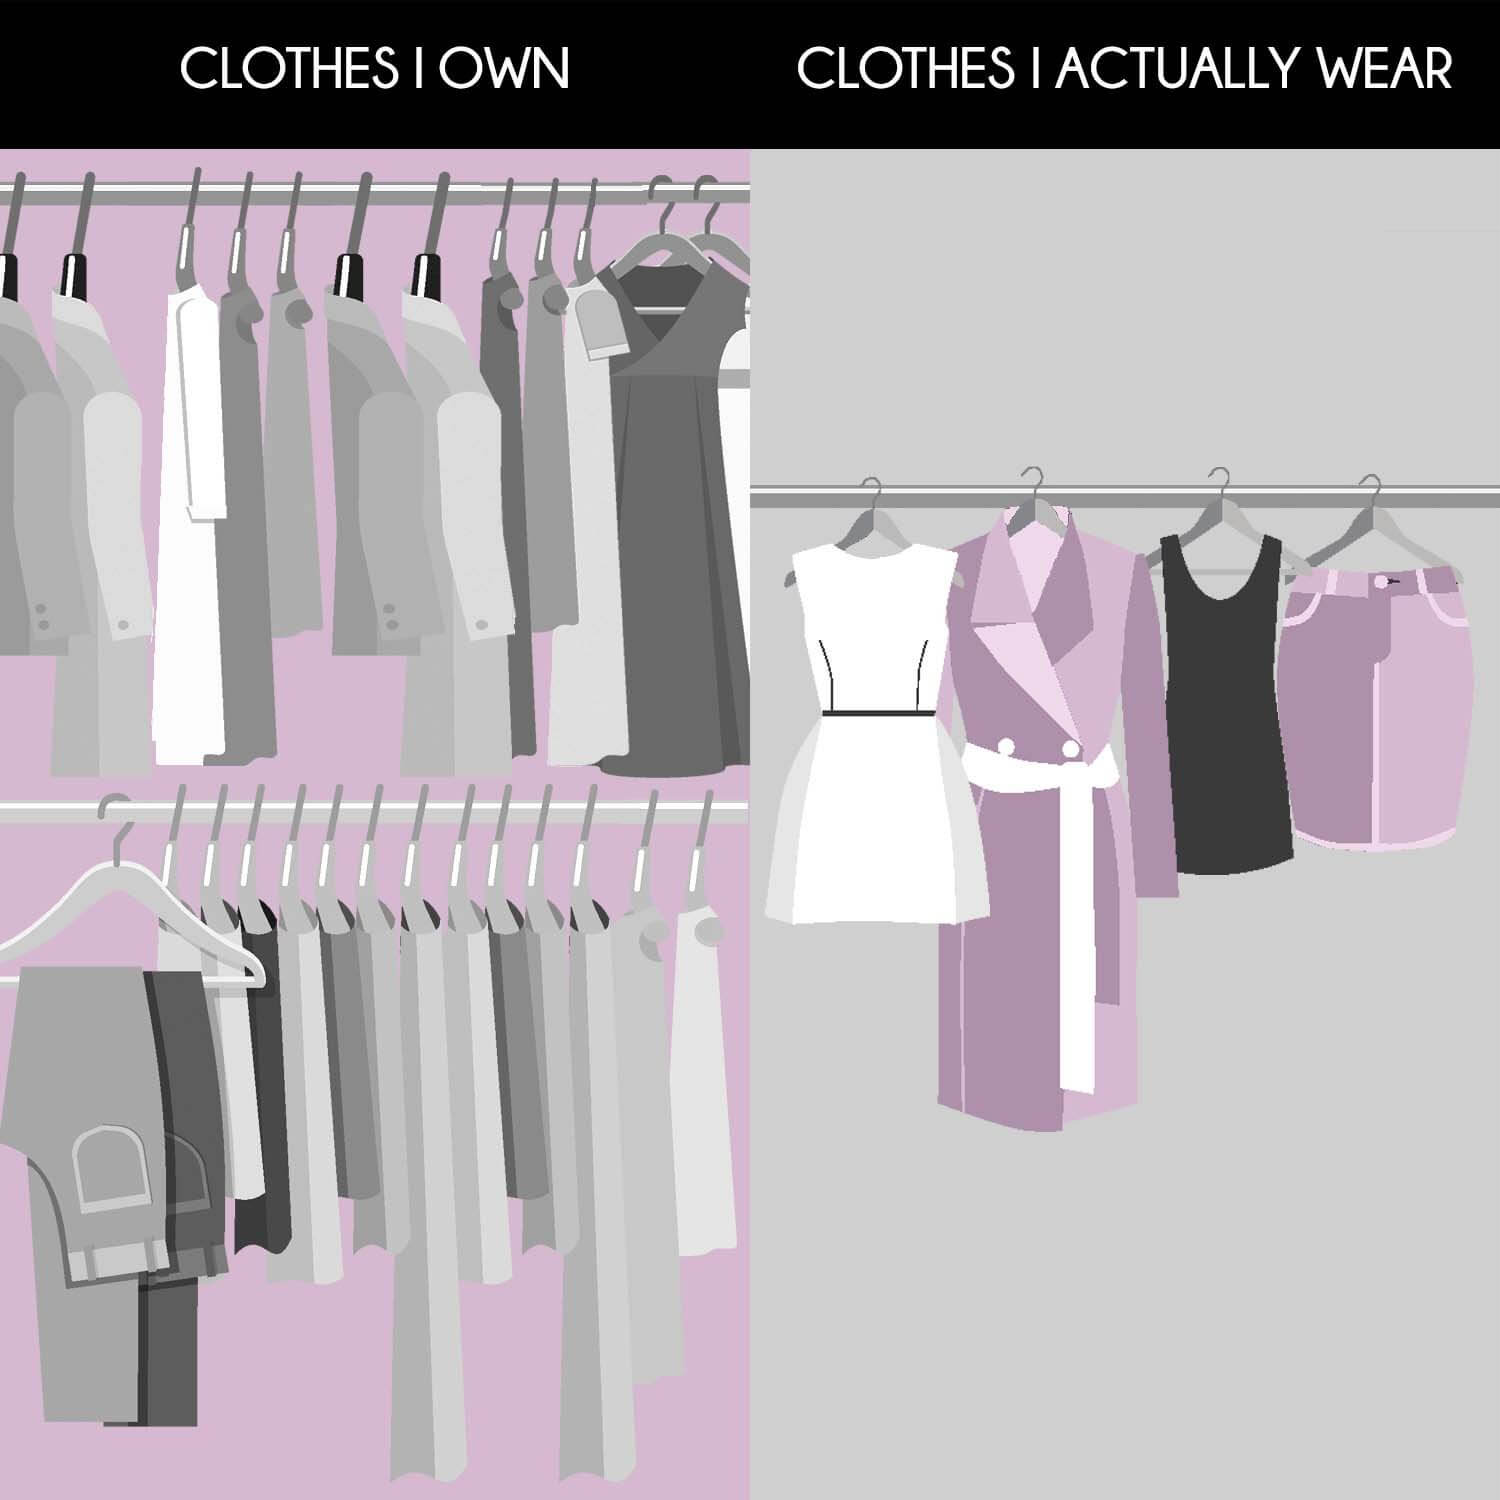 4 Steps To PURGE Your Wardrobe - How To Get Rid Of Clothing